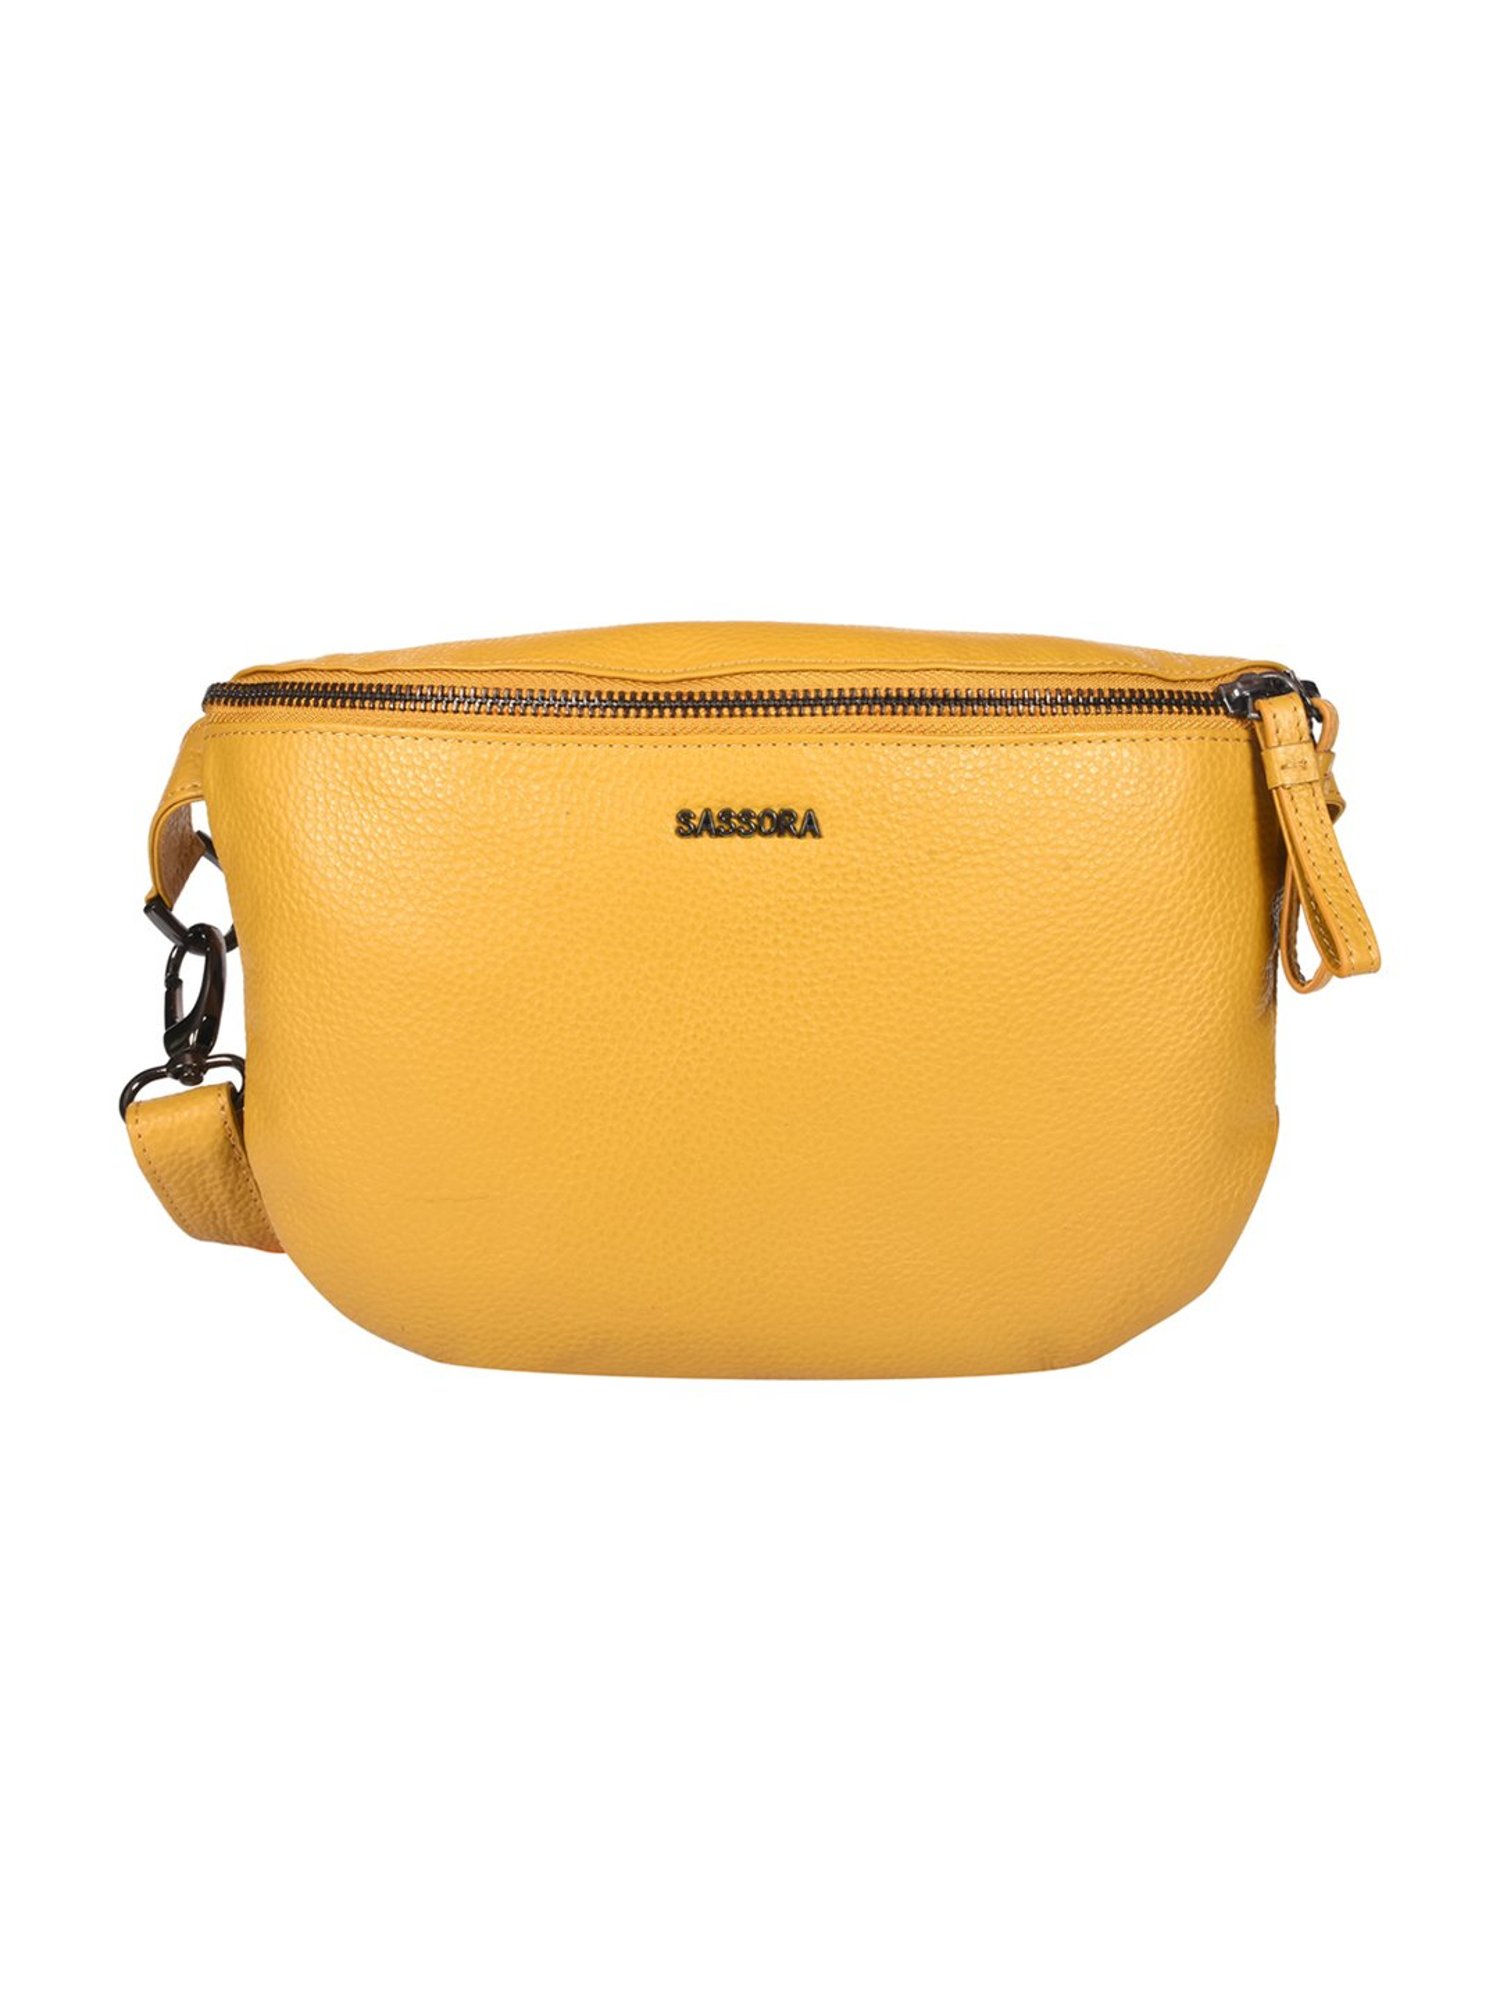 Buy Ted Baker Women Yellow Purse Online - 693643 | The Collective